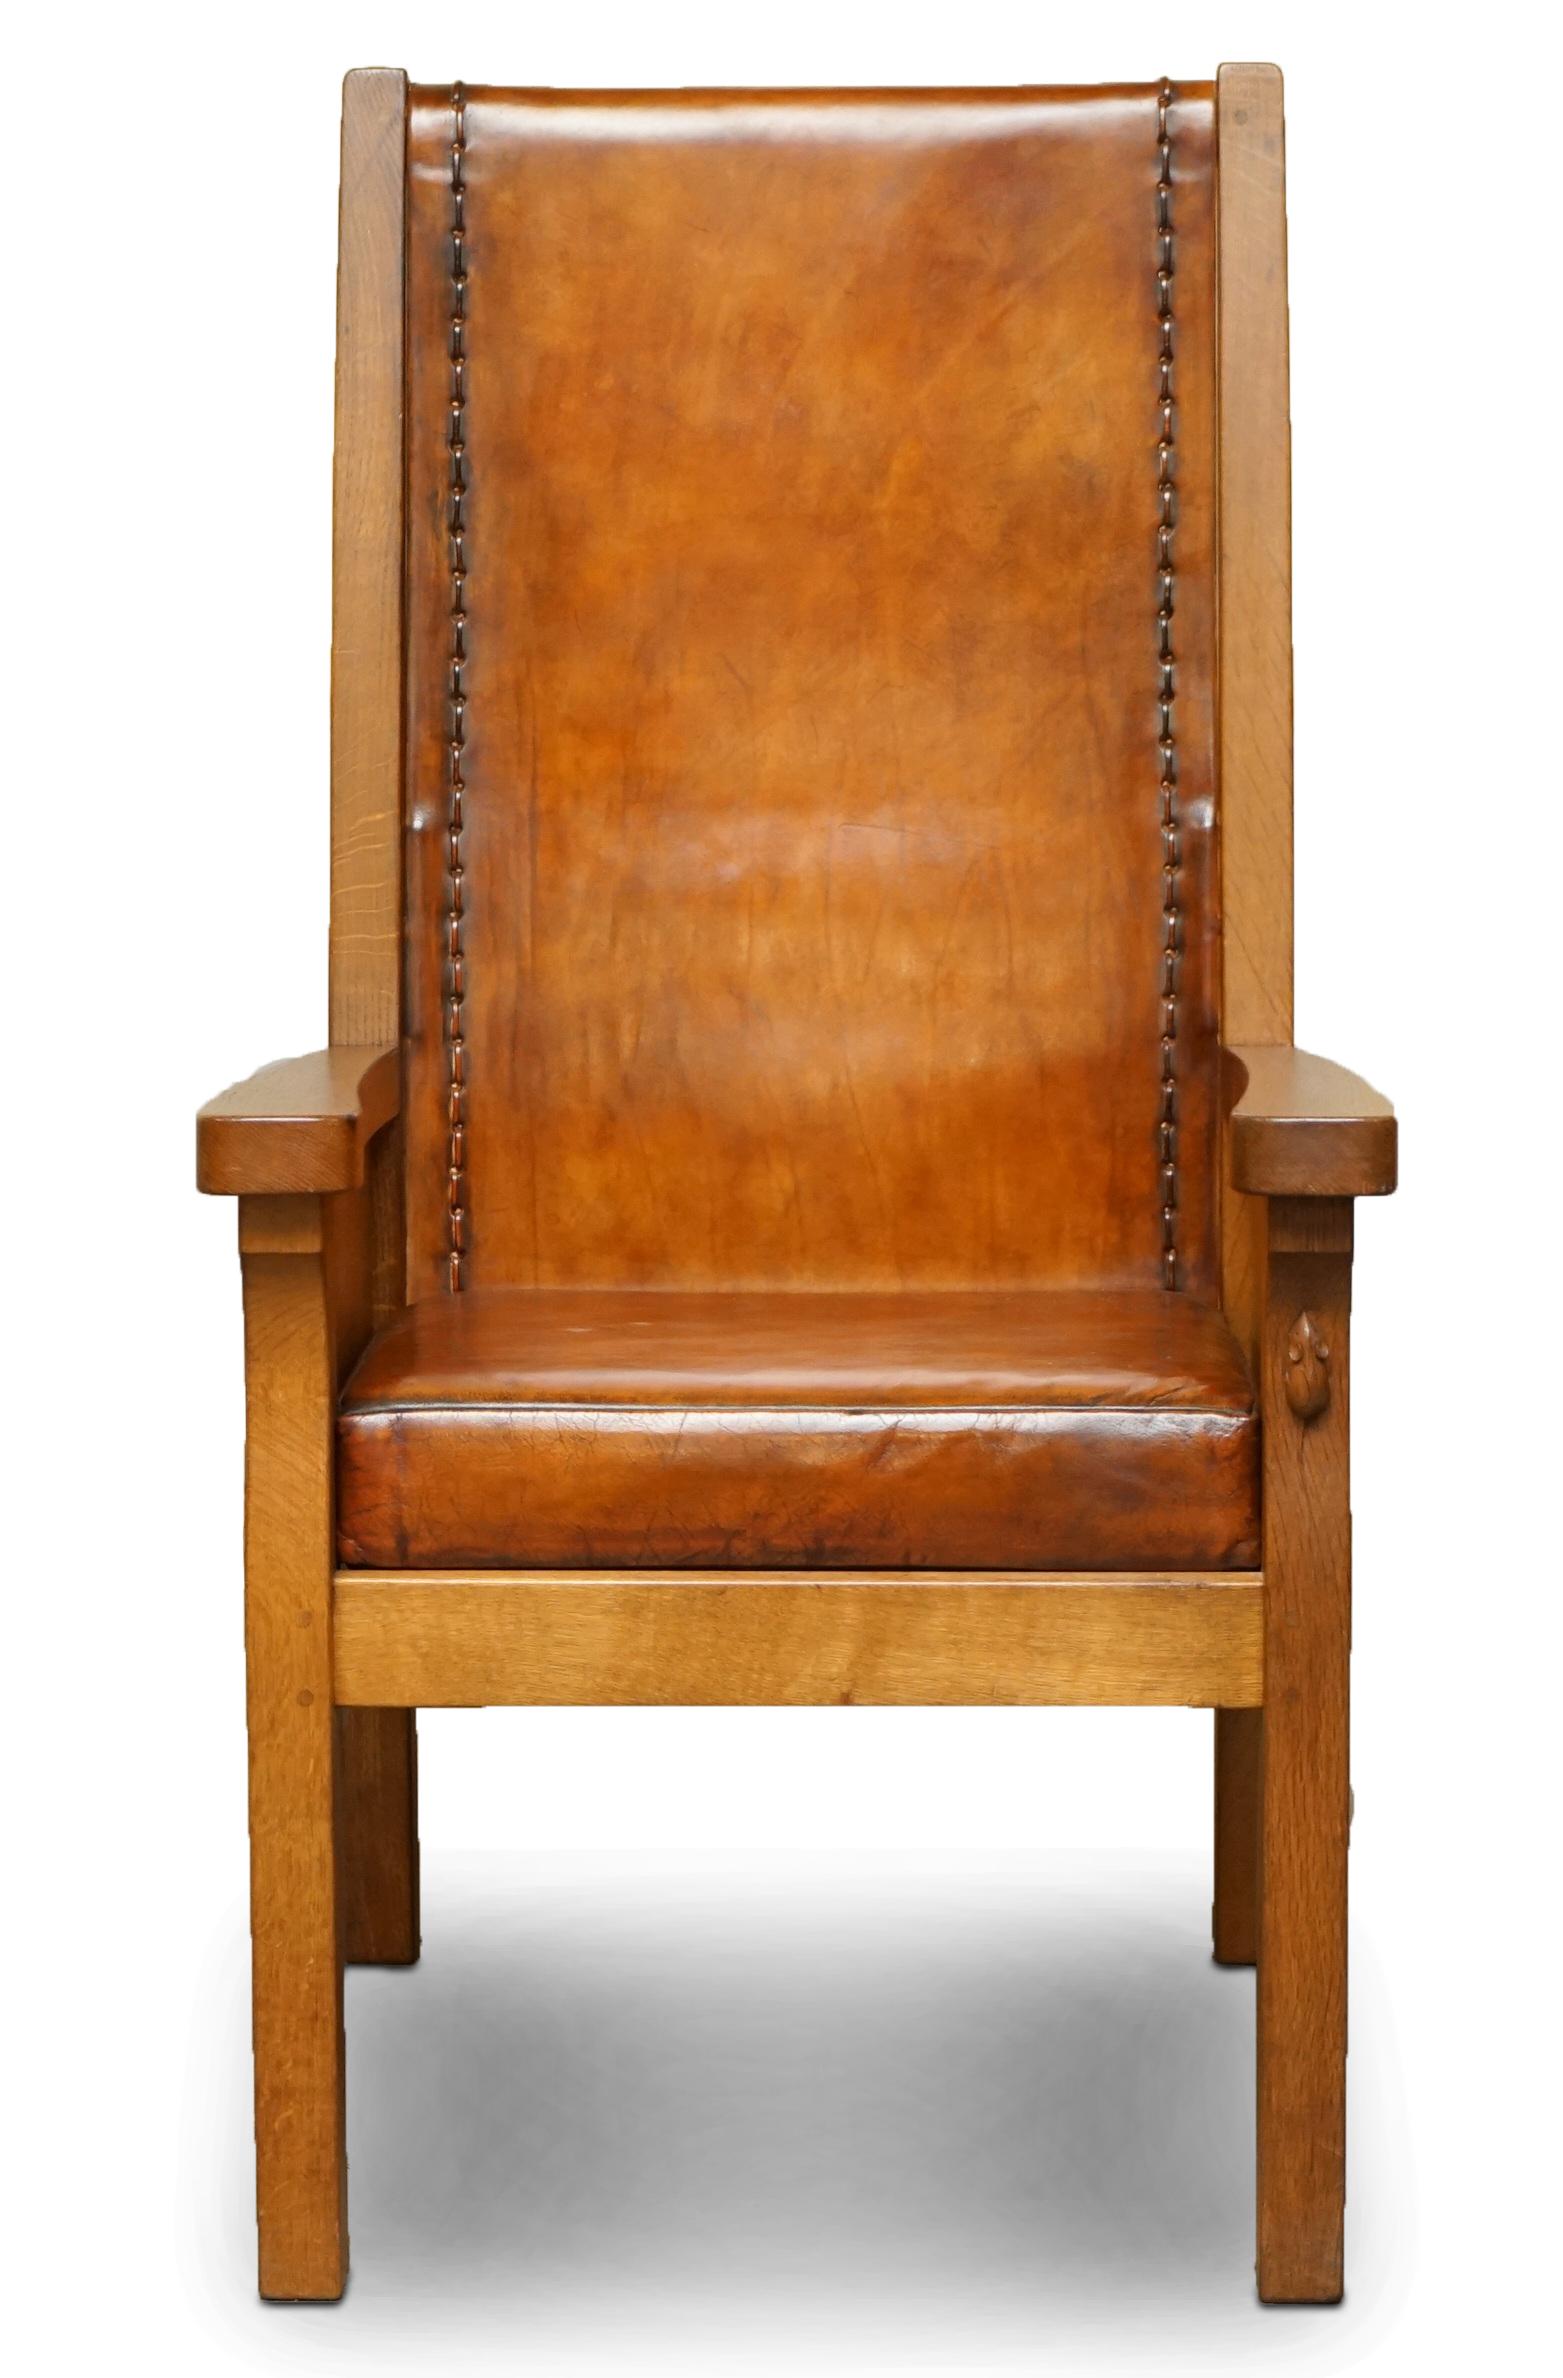 We are delighted to offer for sale this stunning fully restored 1950s hand dyed cigar brown leather English oak Robert Mouseman Thompson armchair

If your looking at this listing then the chances are you know exactly what this chair is. It is a